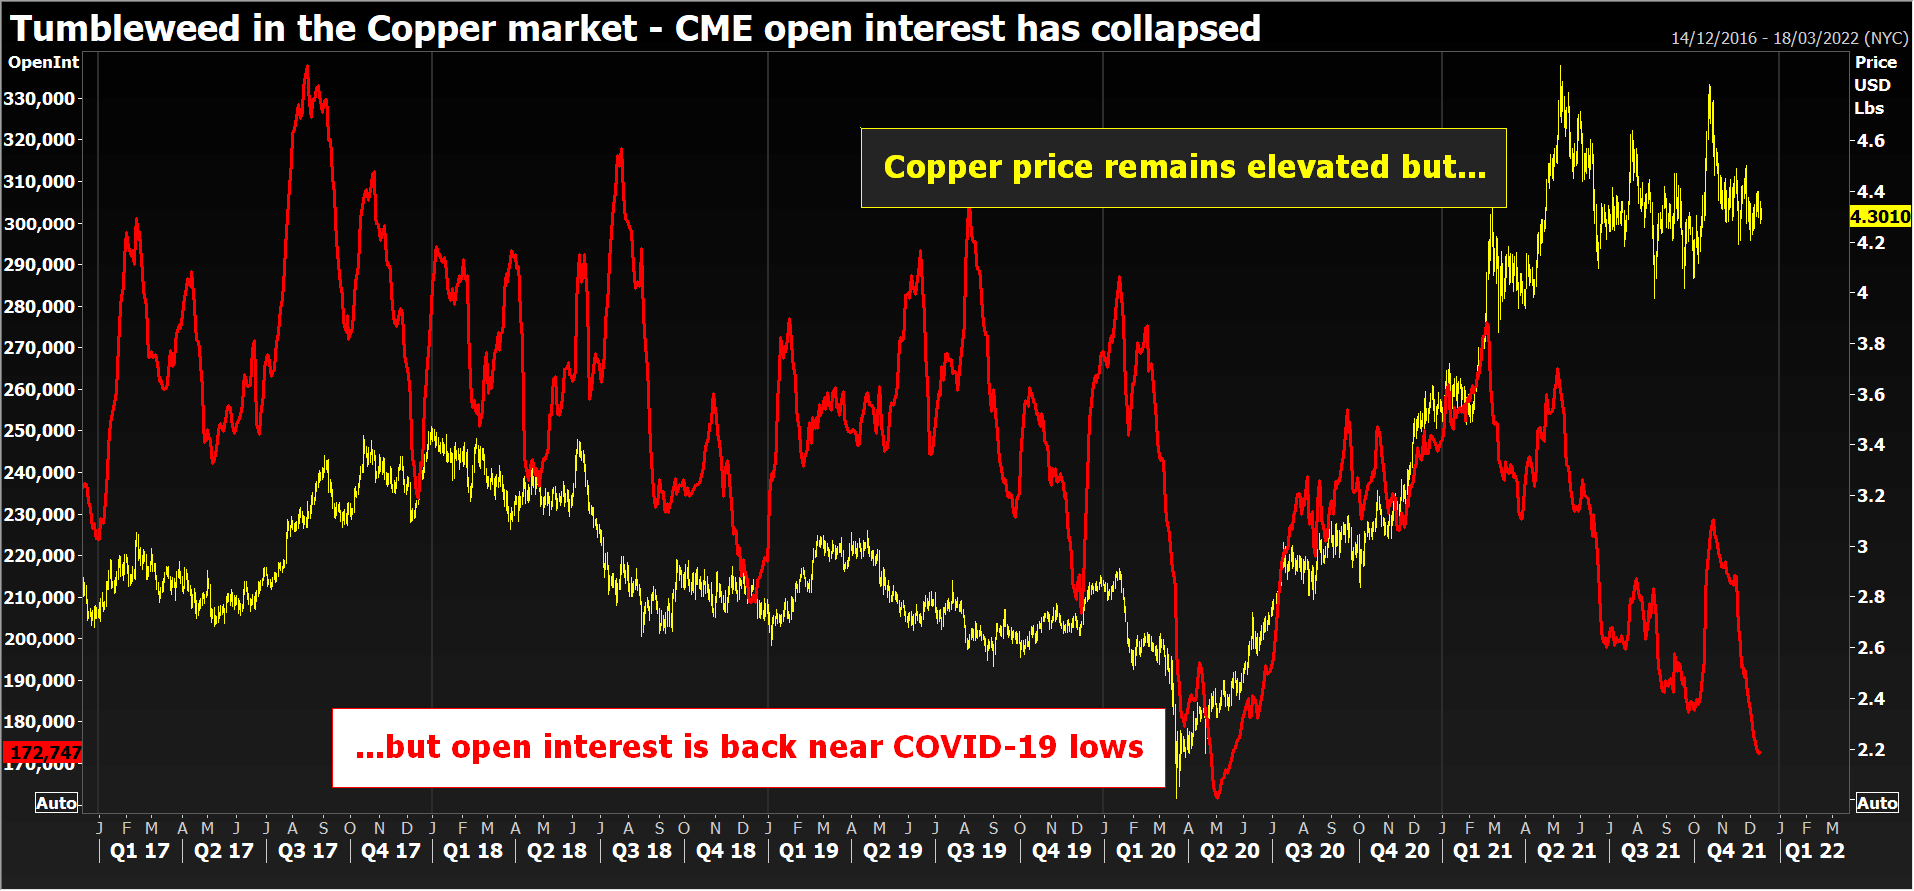 Interest in CME copper falls back to Q2 2020 levels